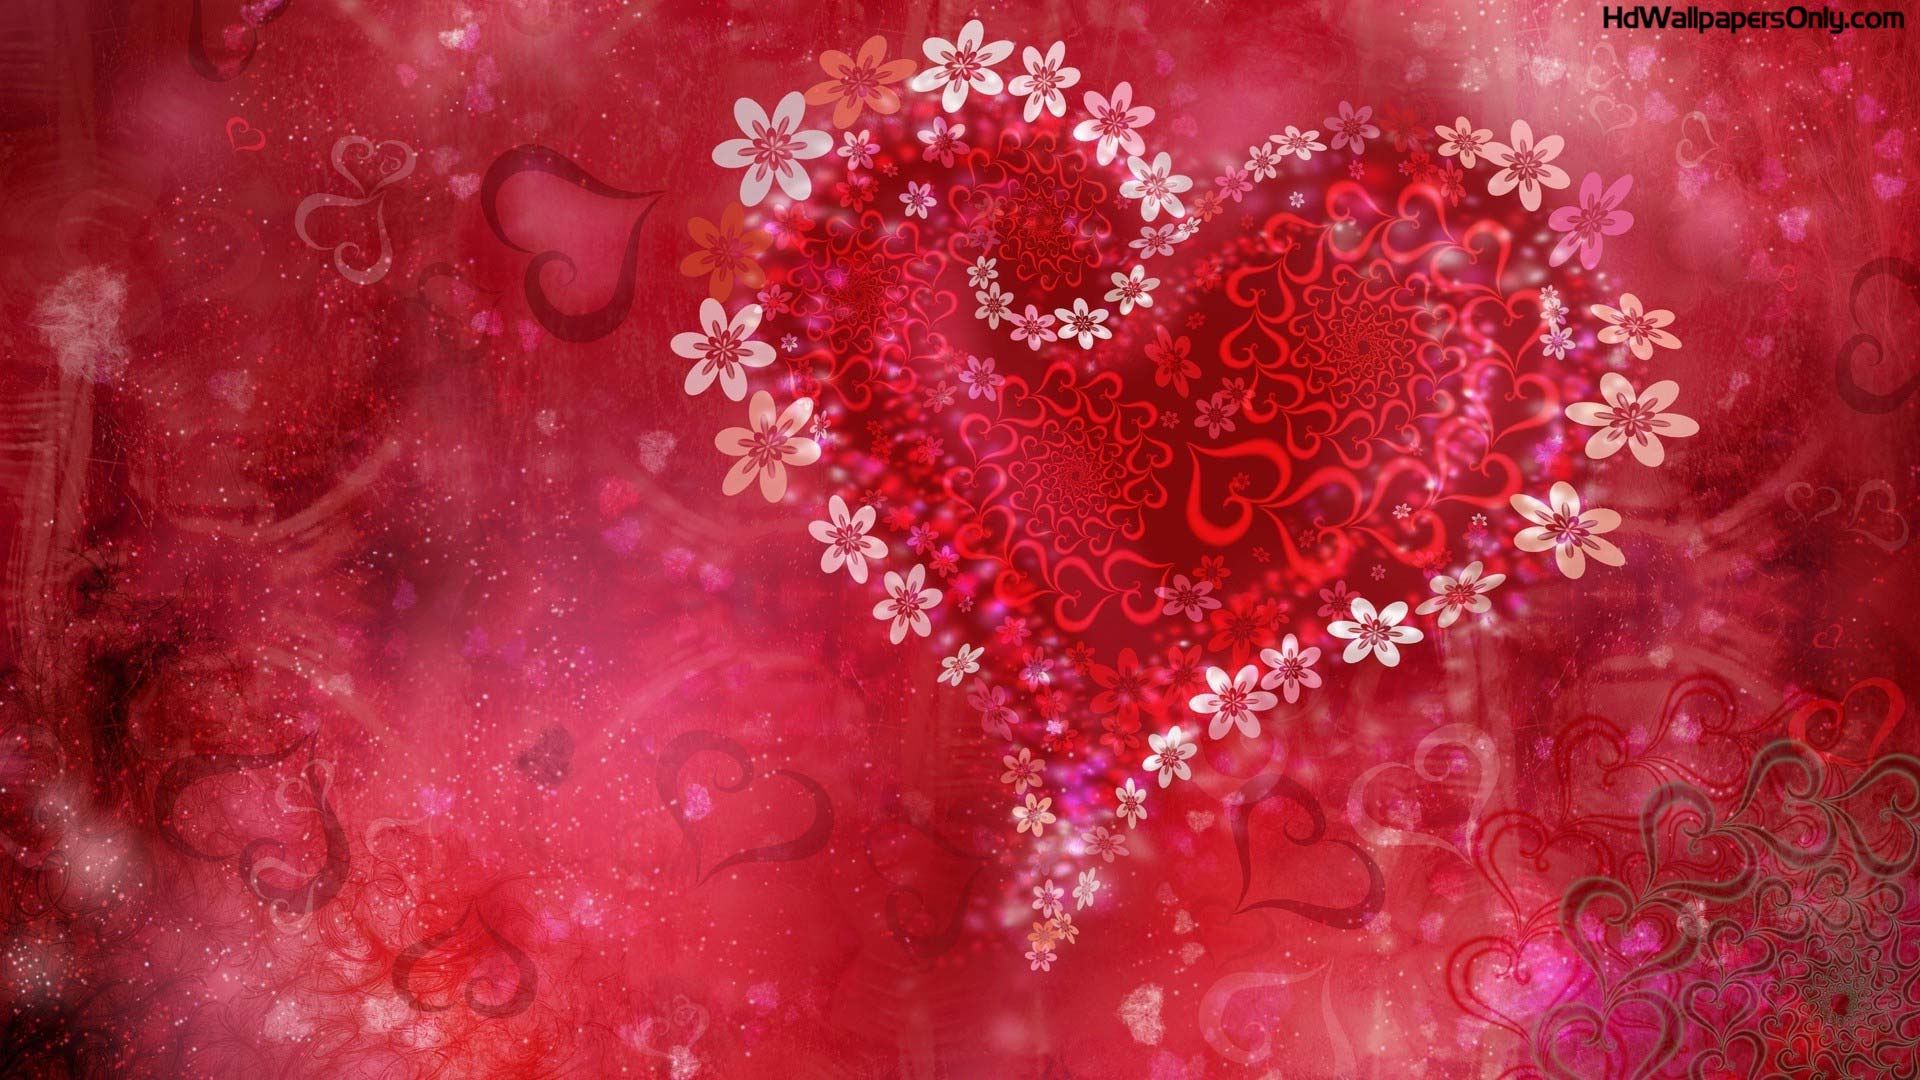 Hearts Background Images - HD Wallpapers Pretty